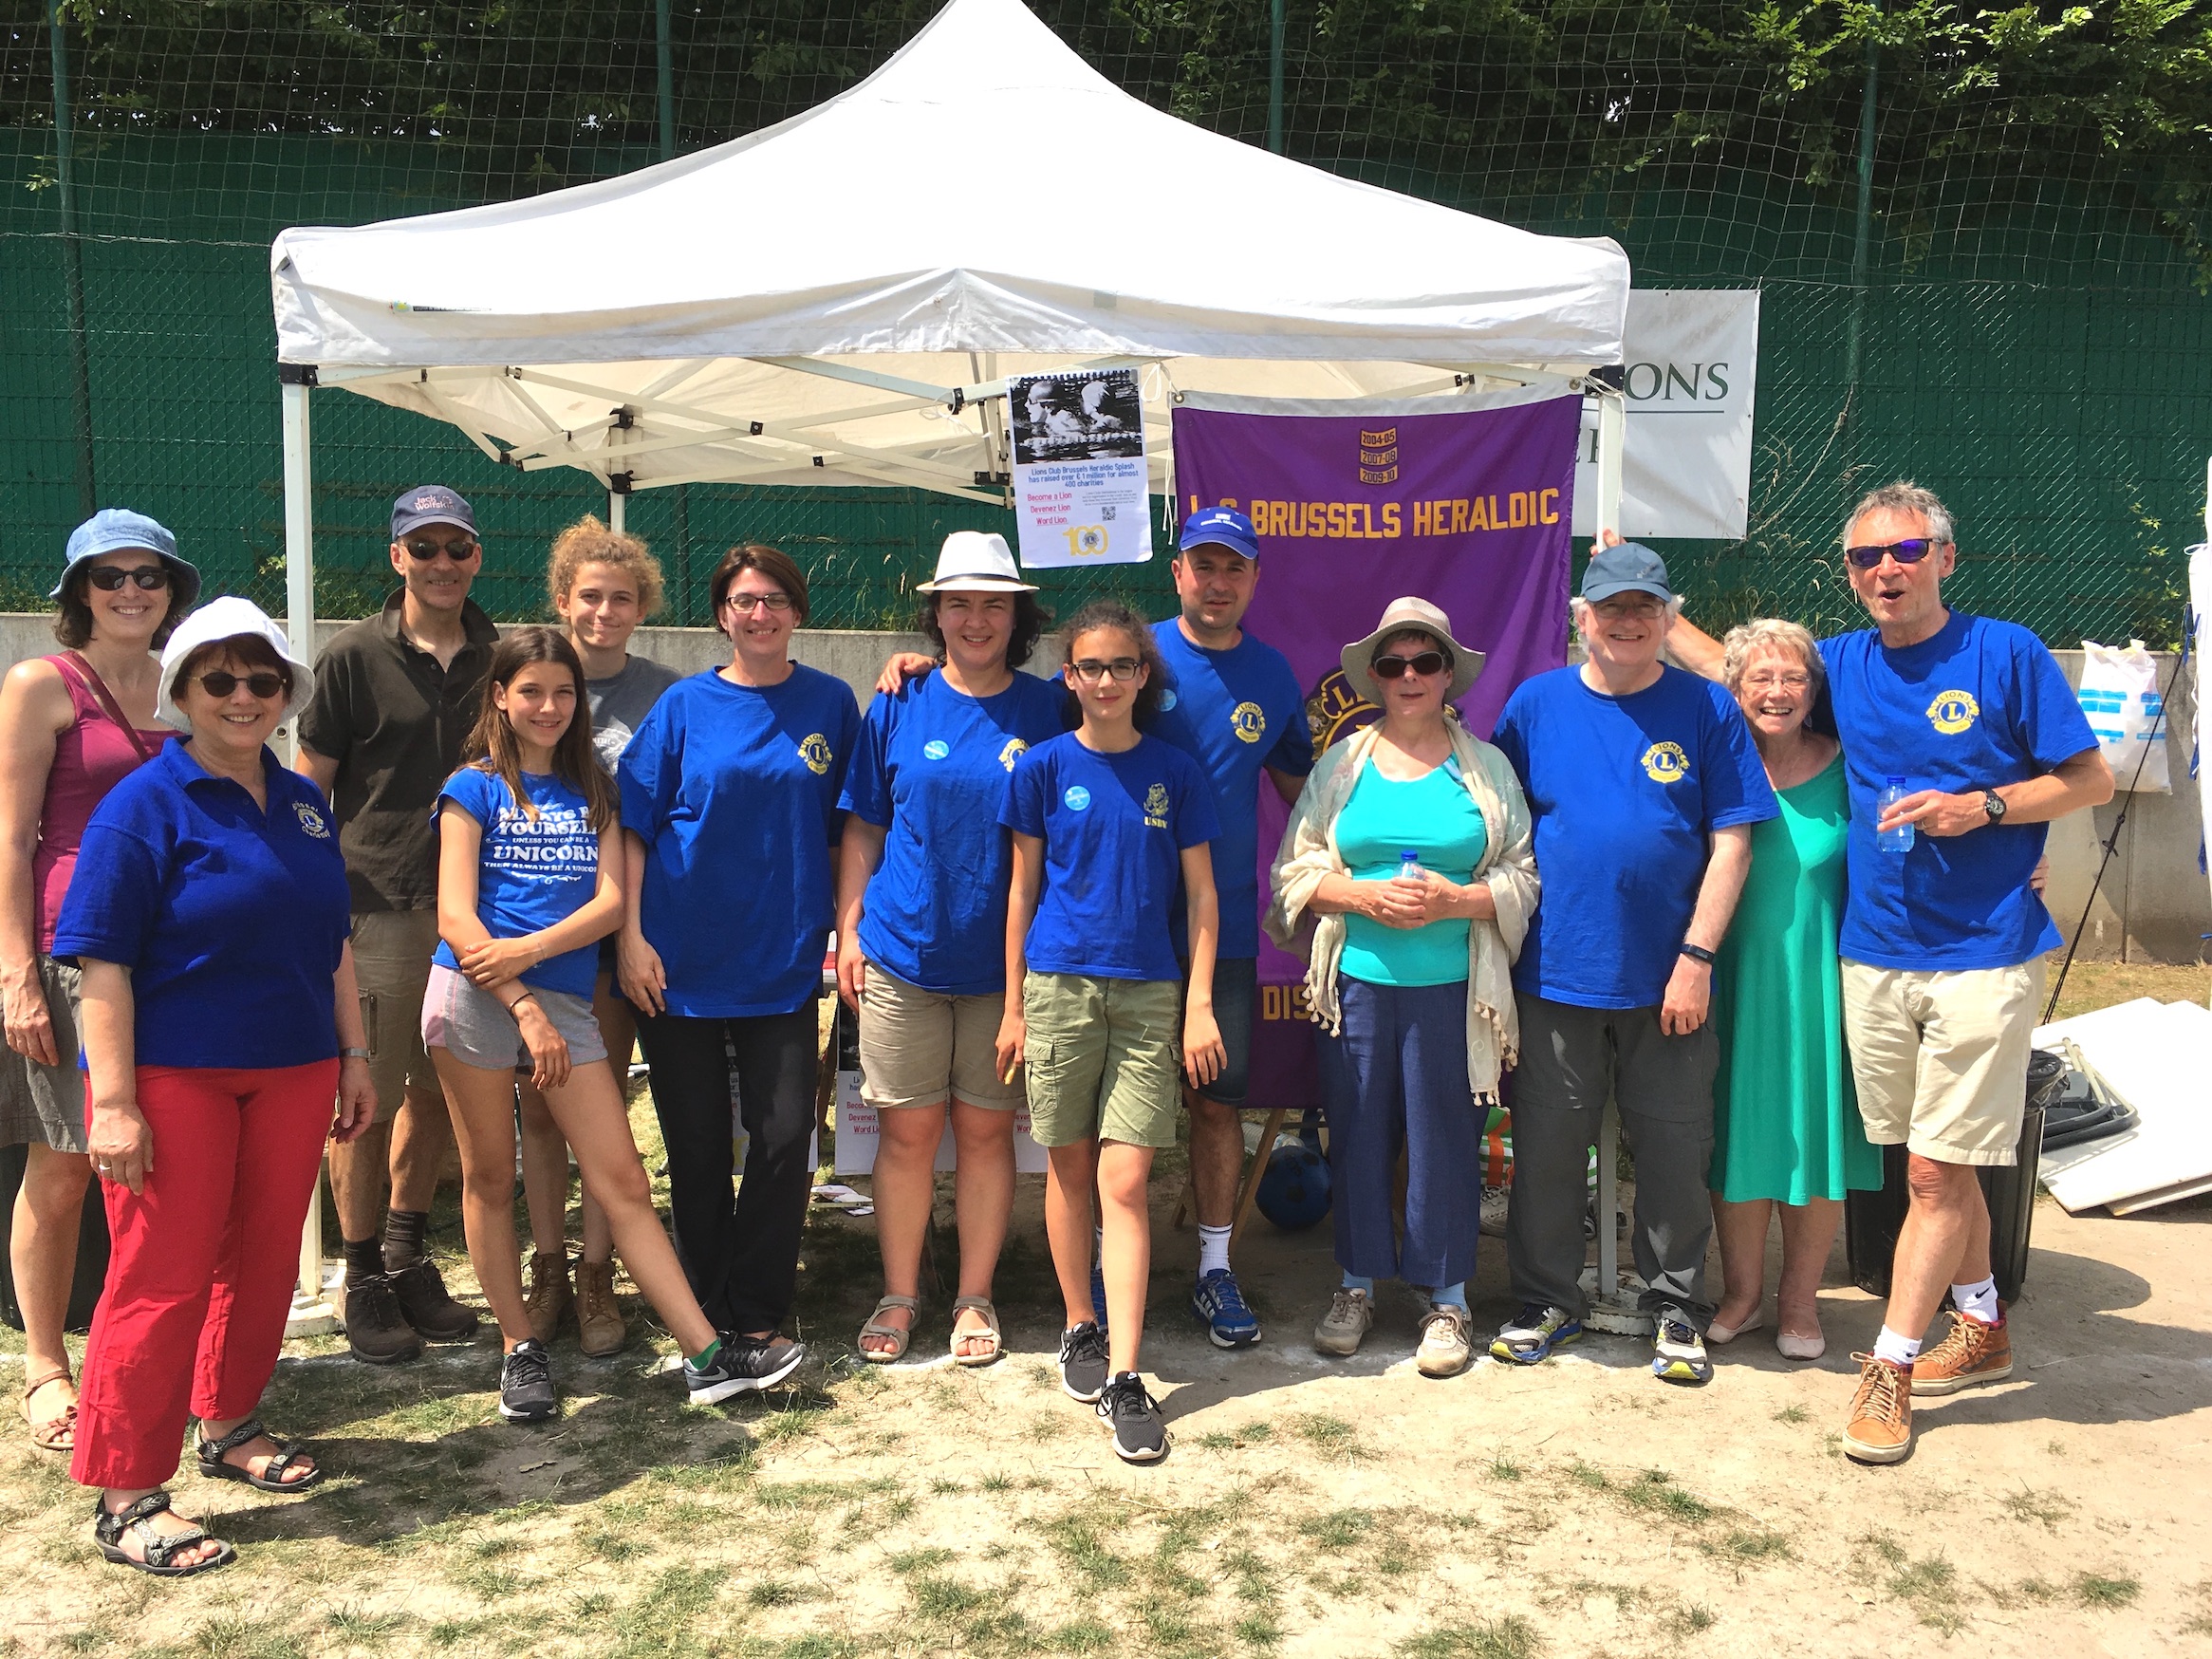 Lions Club Brussels Heraldic supports Relay for Life fight against cancer